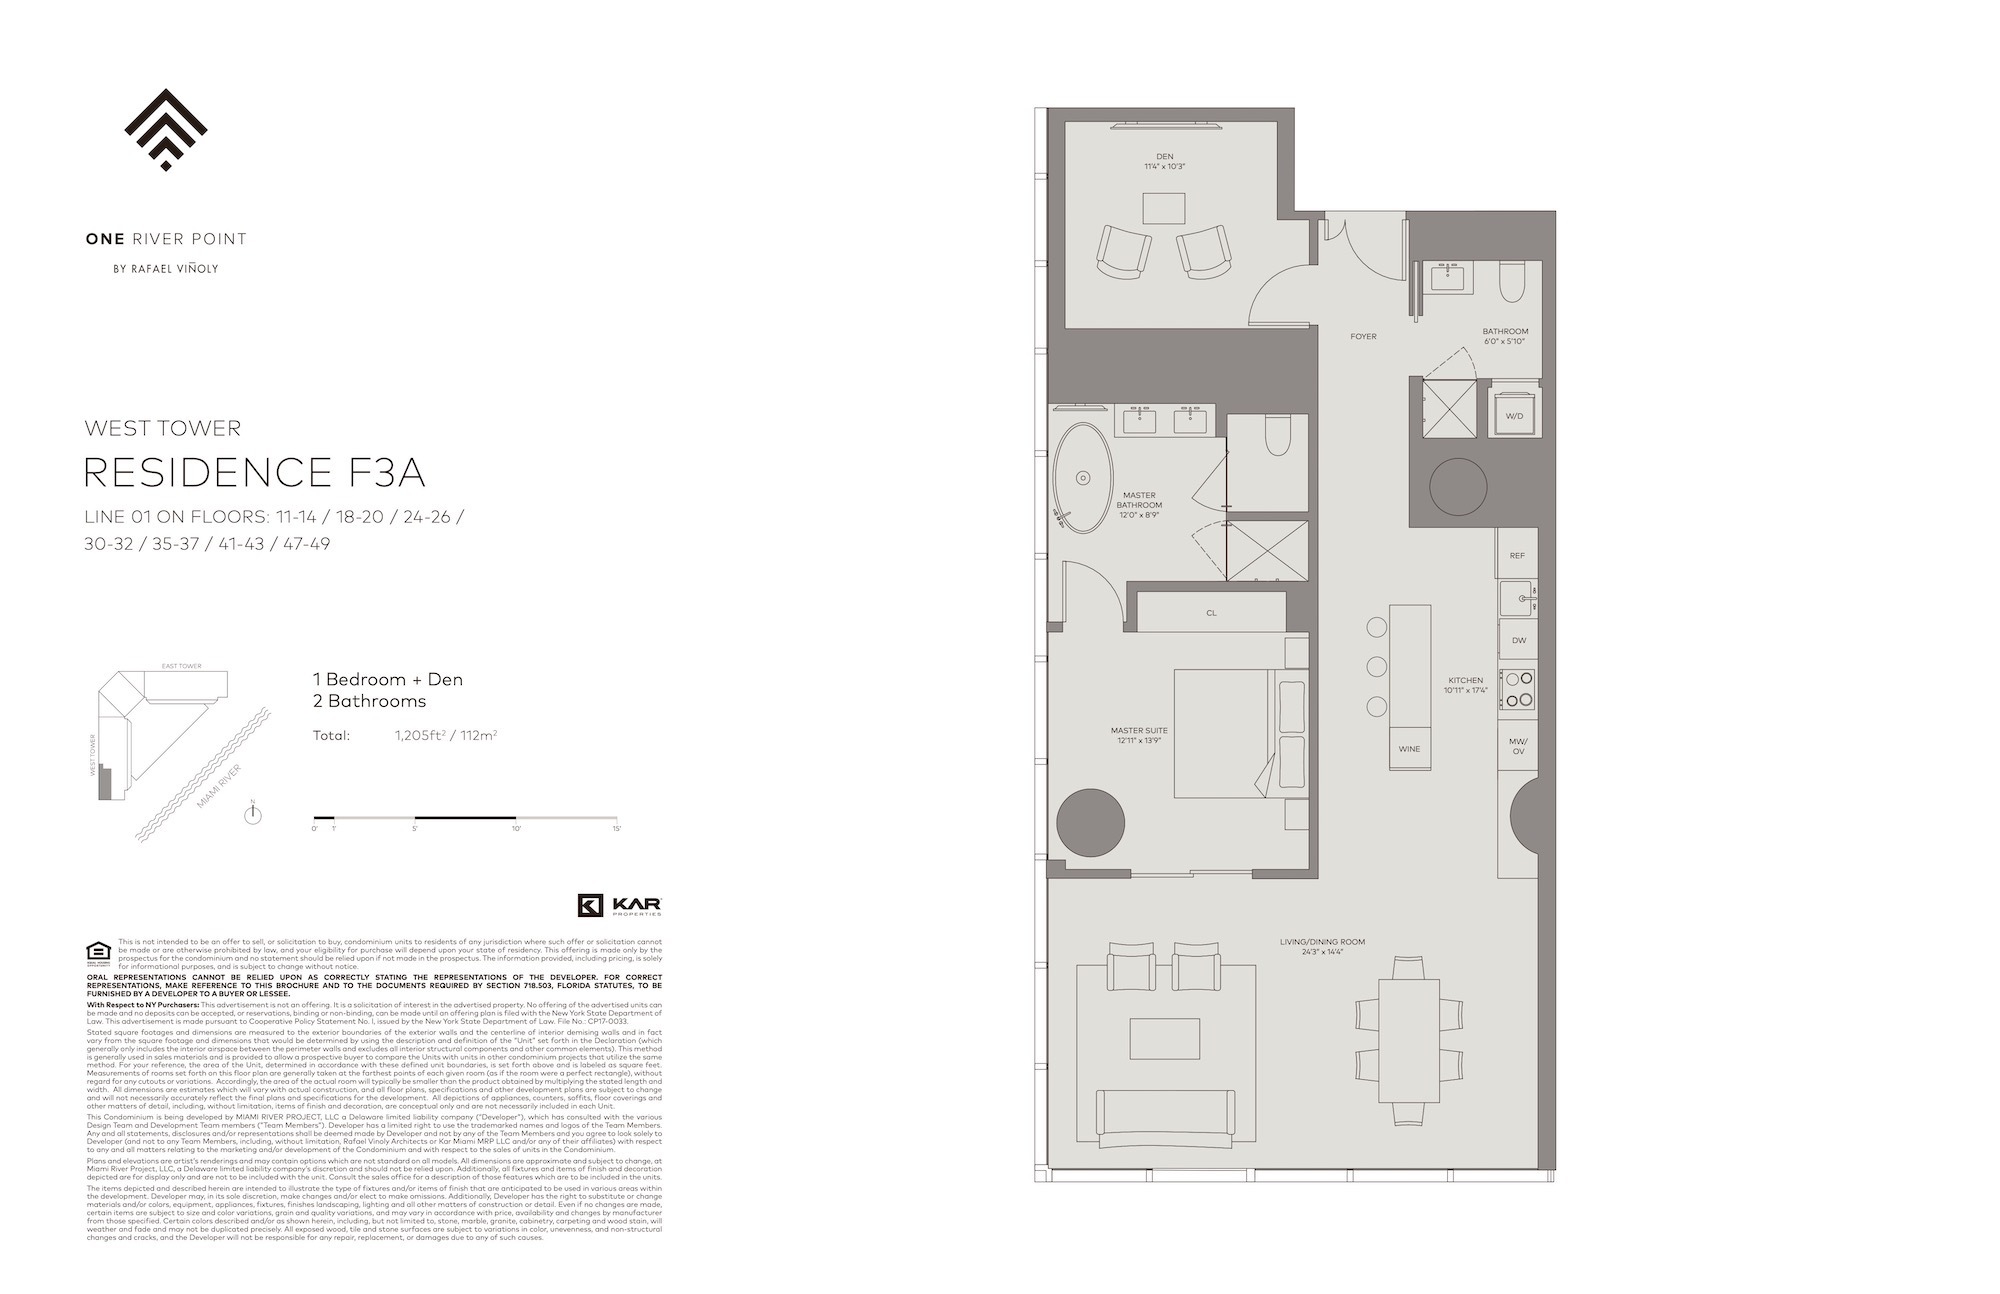 Floor Plan for One River Point Floorplans, Residence F3A